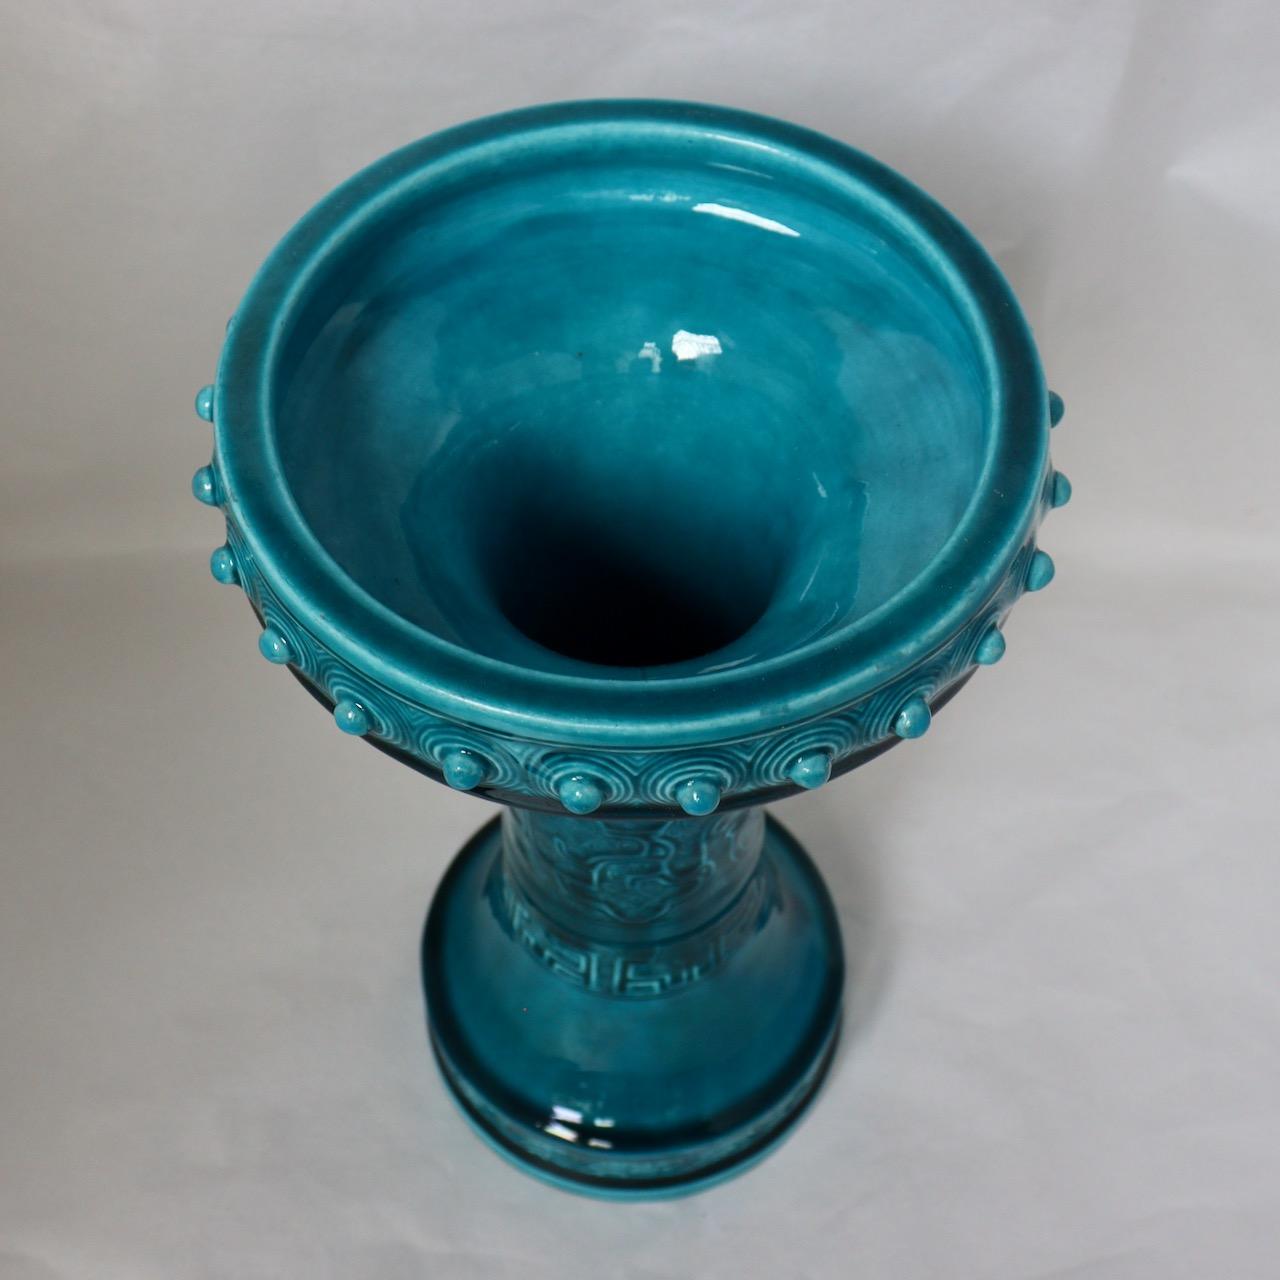 Chinese Export Theodore Deck (1823-1891) , A Chinese Archaïc Taste Blue Faience Vase circa 1875